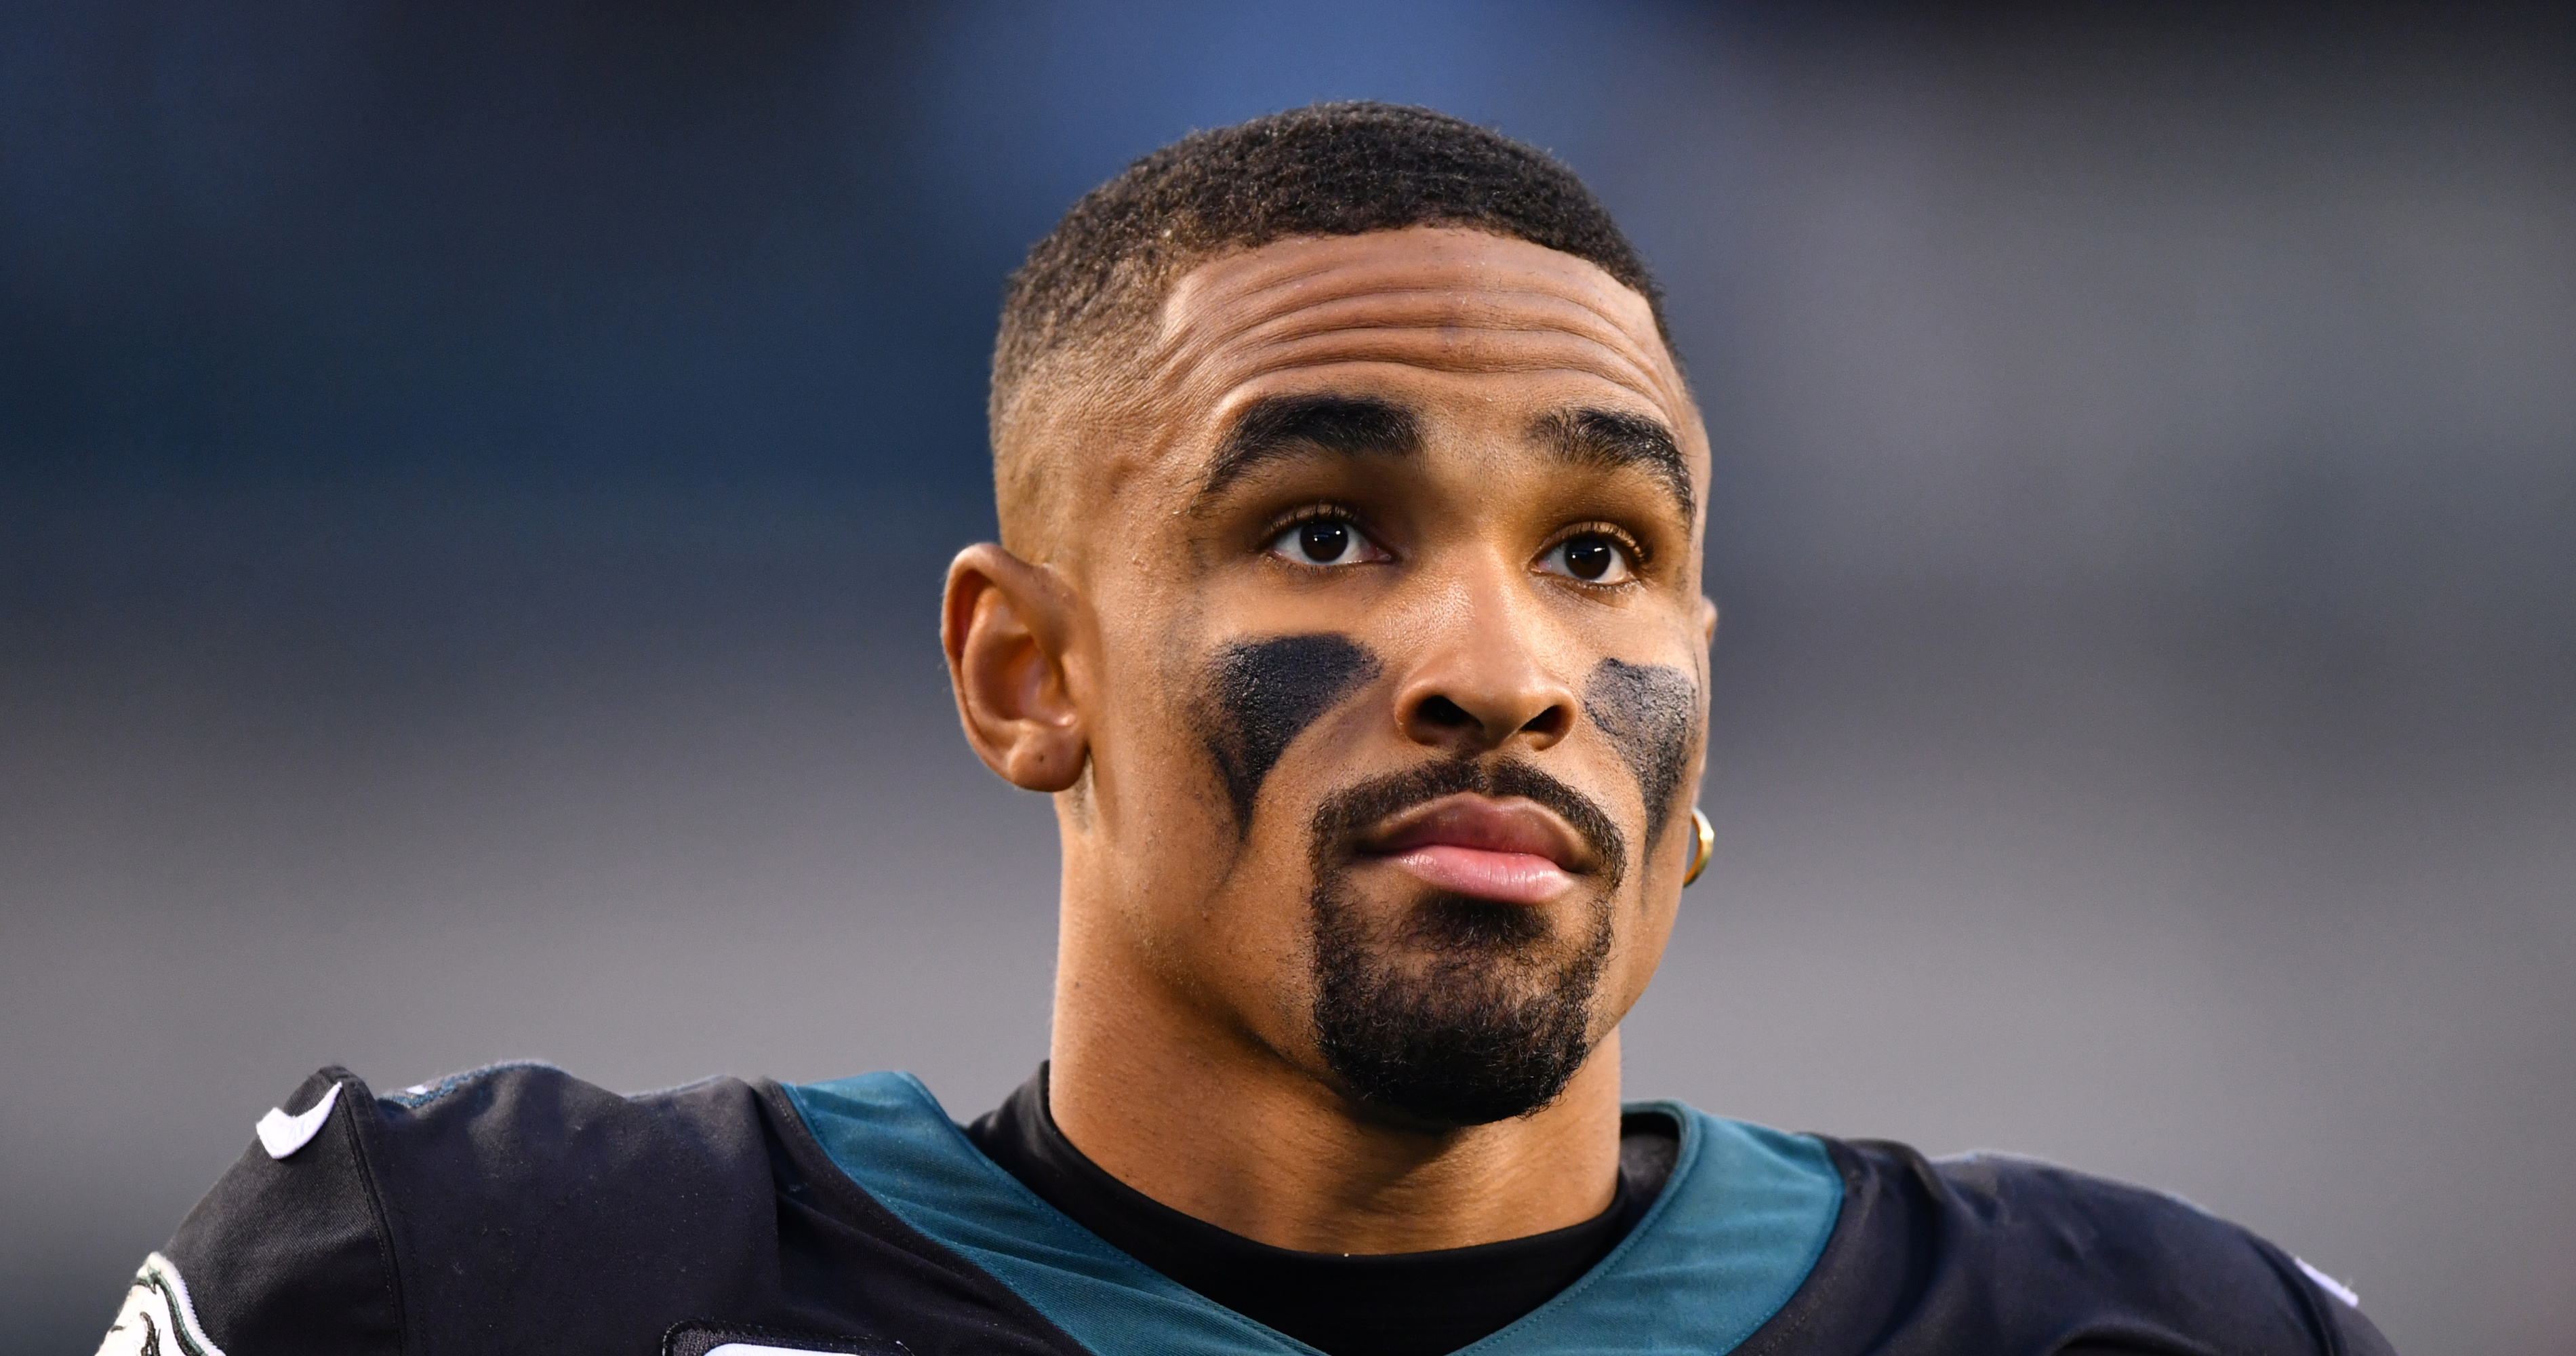 Report: Eagles GM Less Confident in Jalen Hurts as QB Next Year